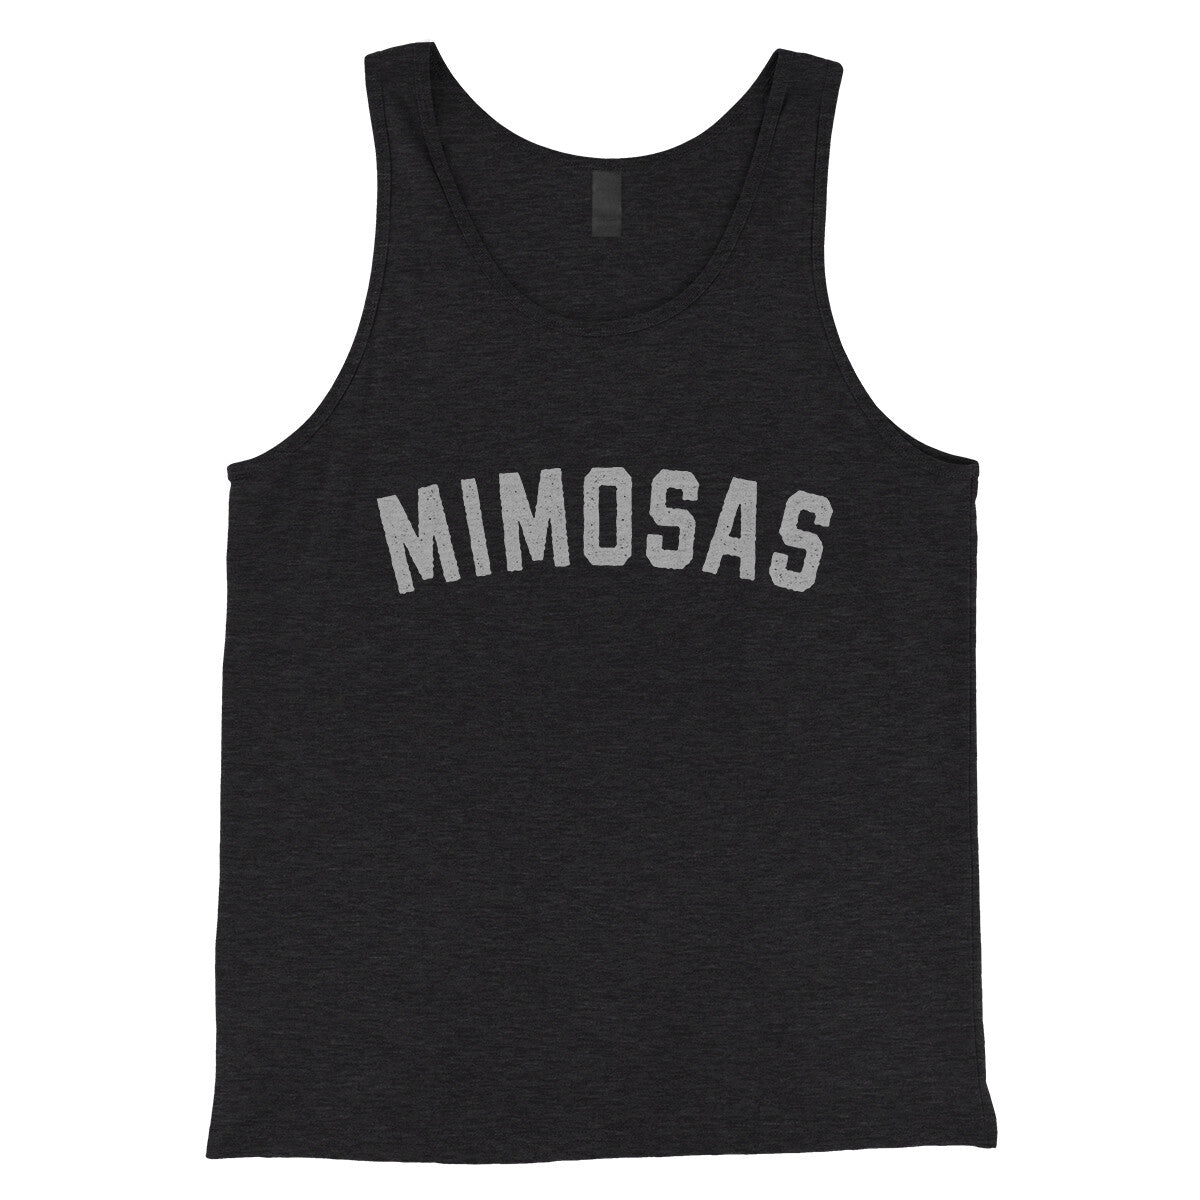 Mimosas in Charcoal Black TriBlend Color